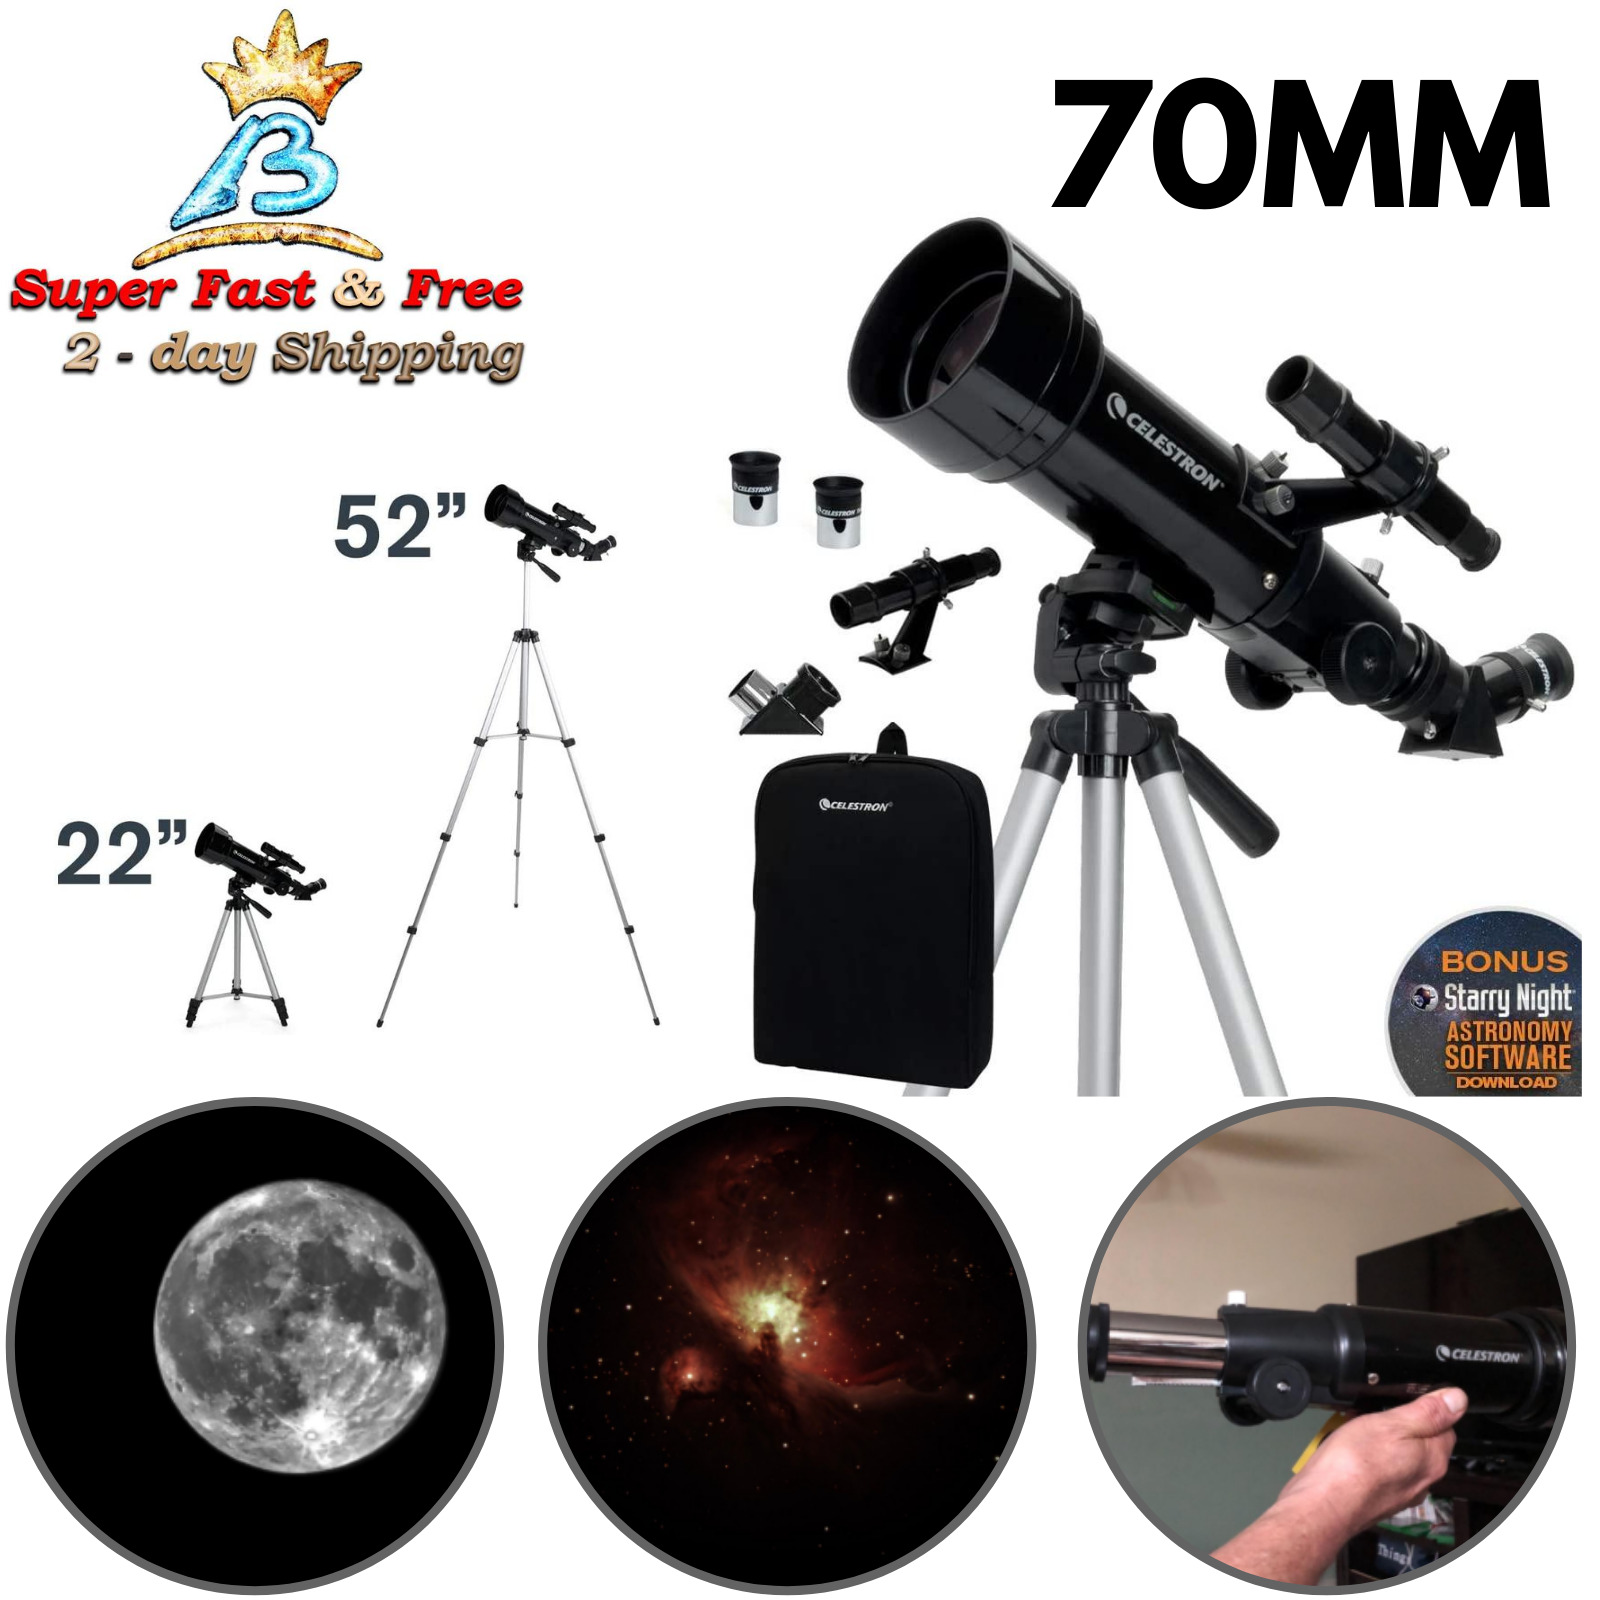 Astronomical Refracter Telescope 70 MM Travel Scope W/ Tripod Fully-Coated Glass